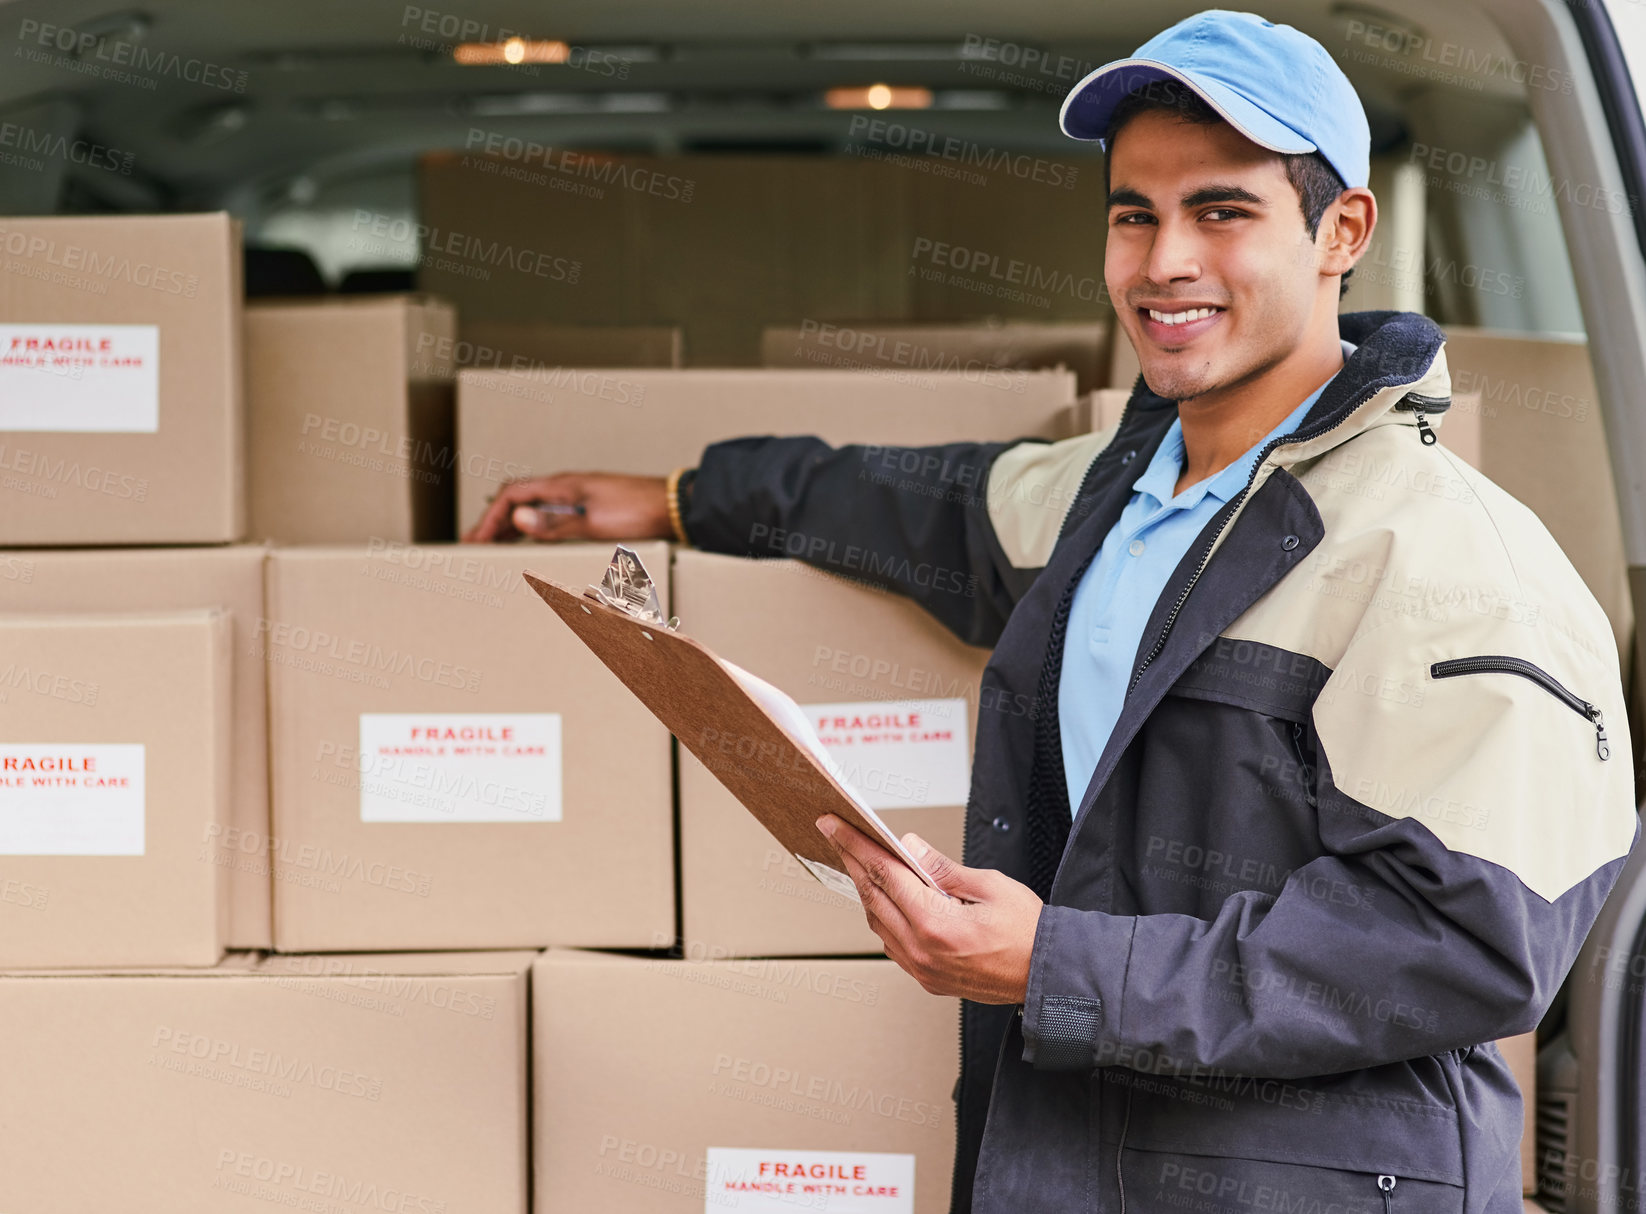 Buy stock photo Portrait of a delivery man standing next to a van full of boxes